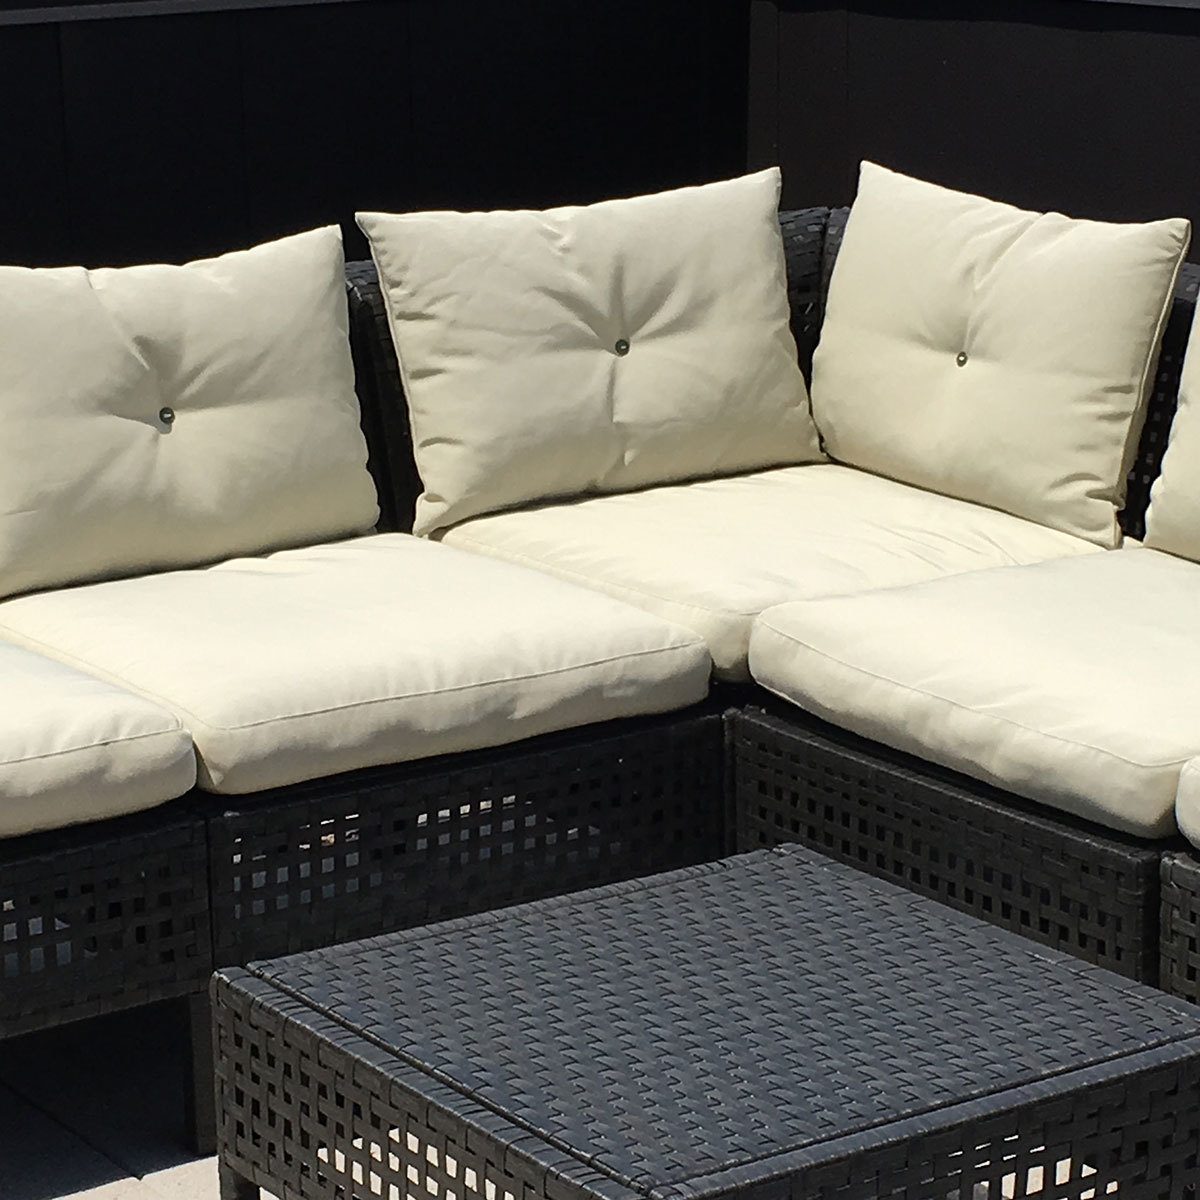 Ikea S Add Ties To Outdoor Patio Cushions - How To Keep Outdoor Furniture Cushions From Sliding